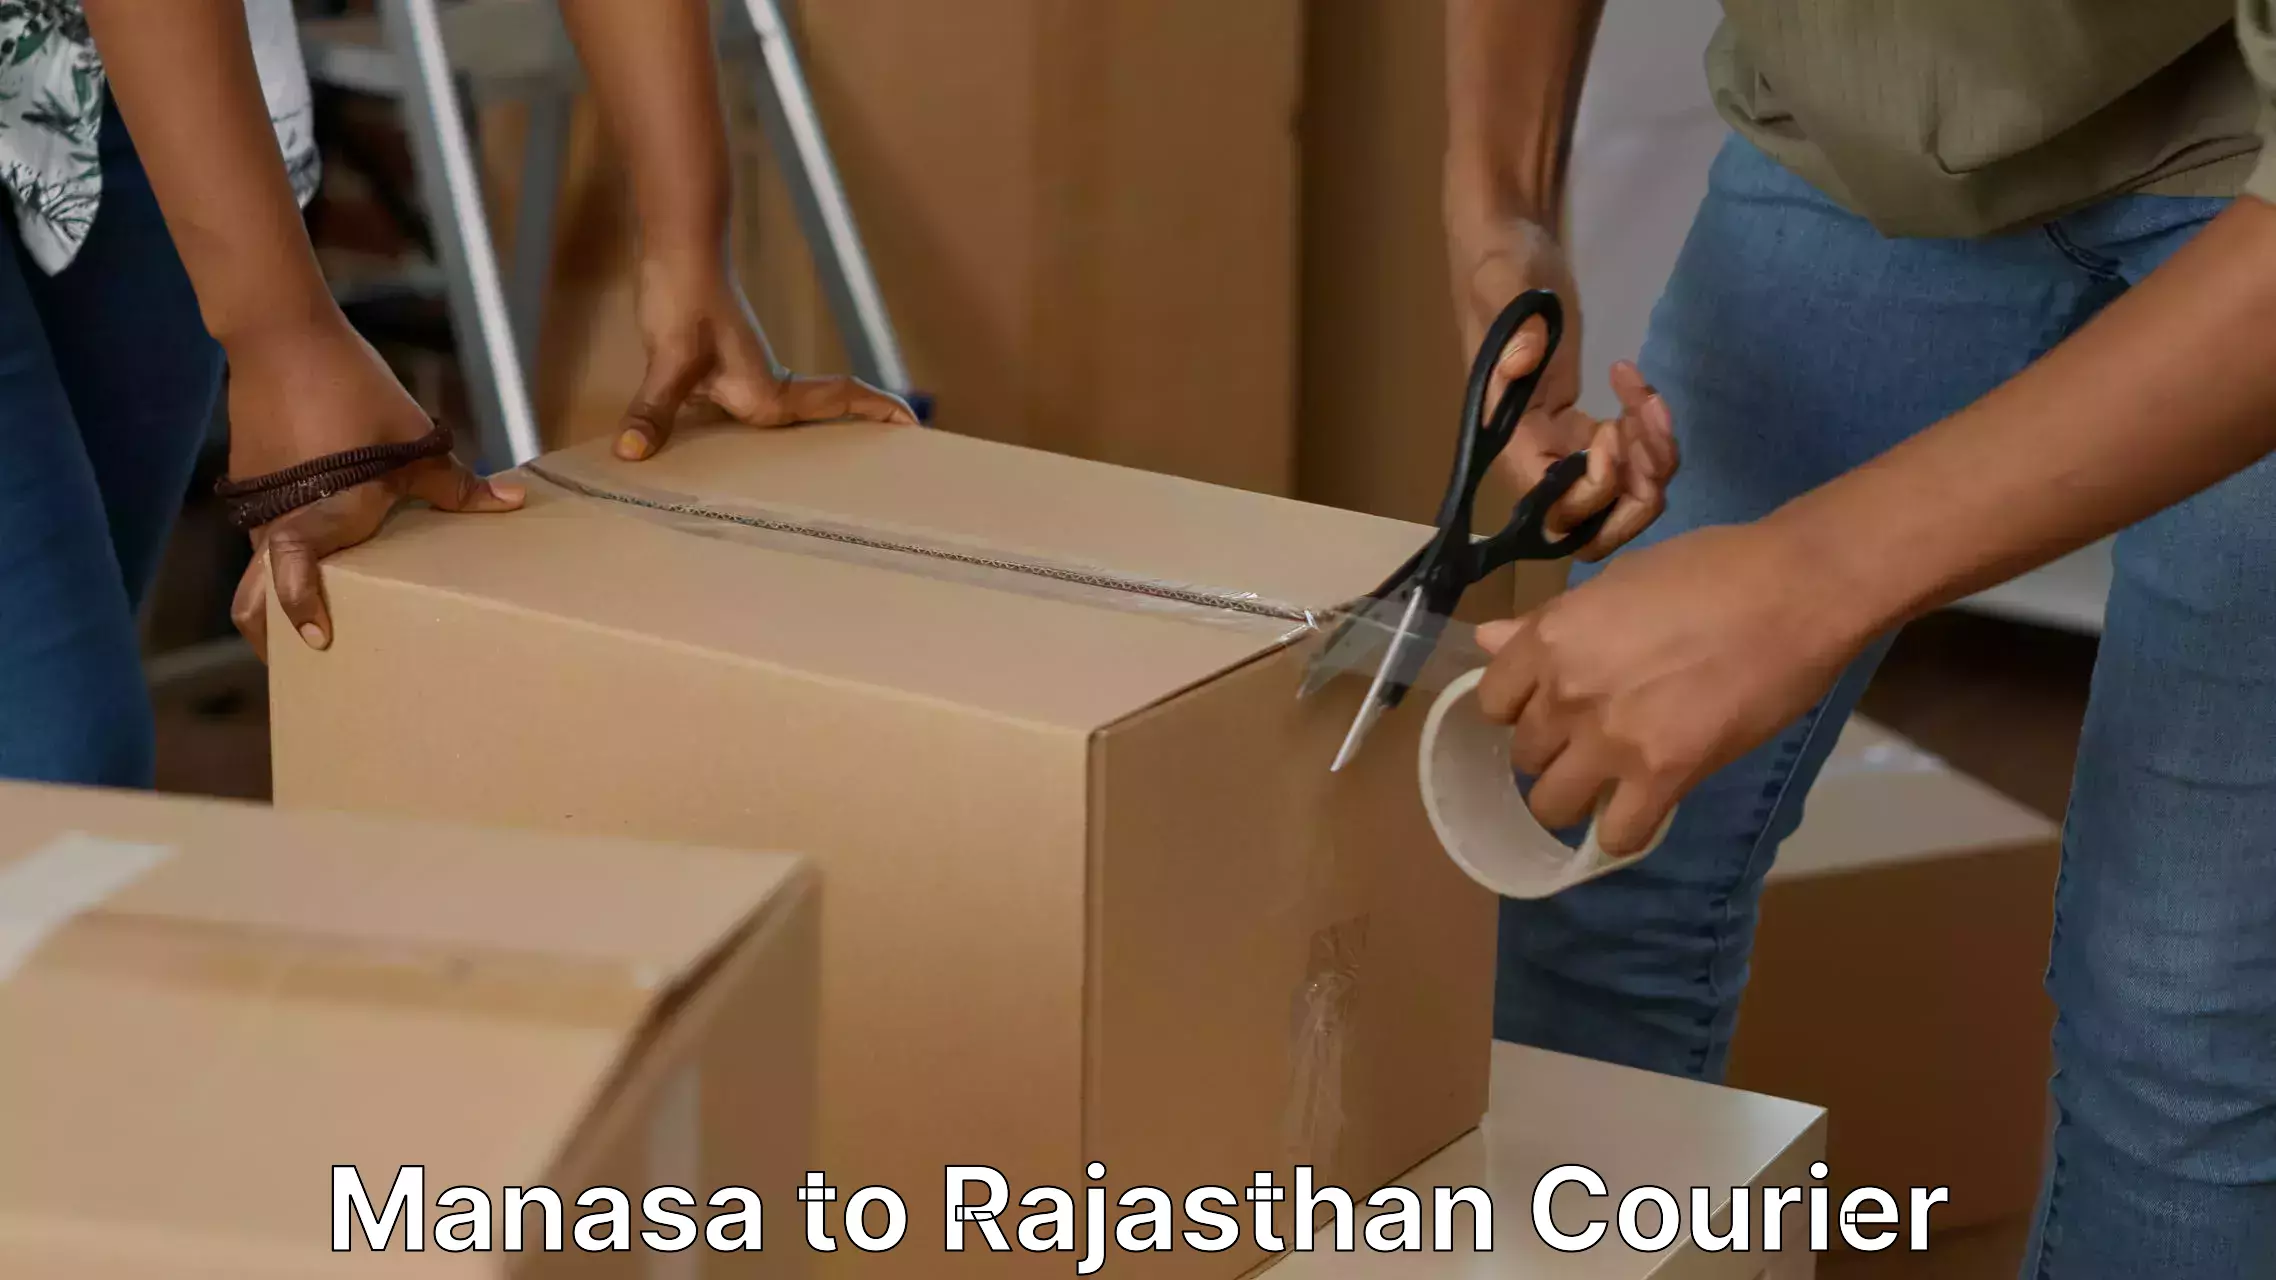 Furniture transport specialists Manasa to Yeswanthapur